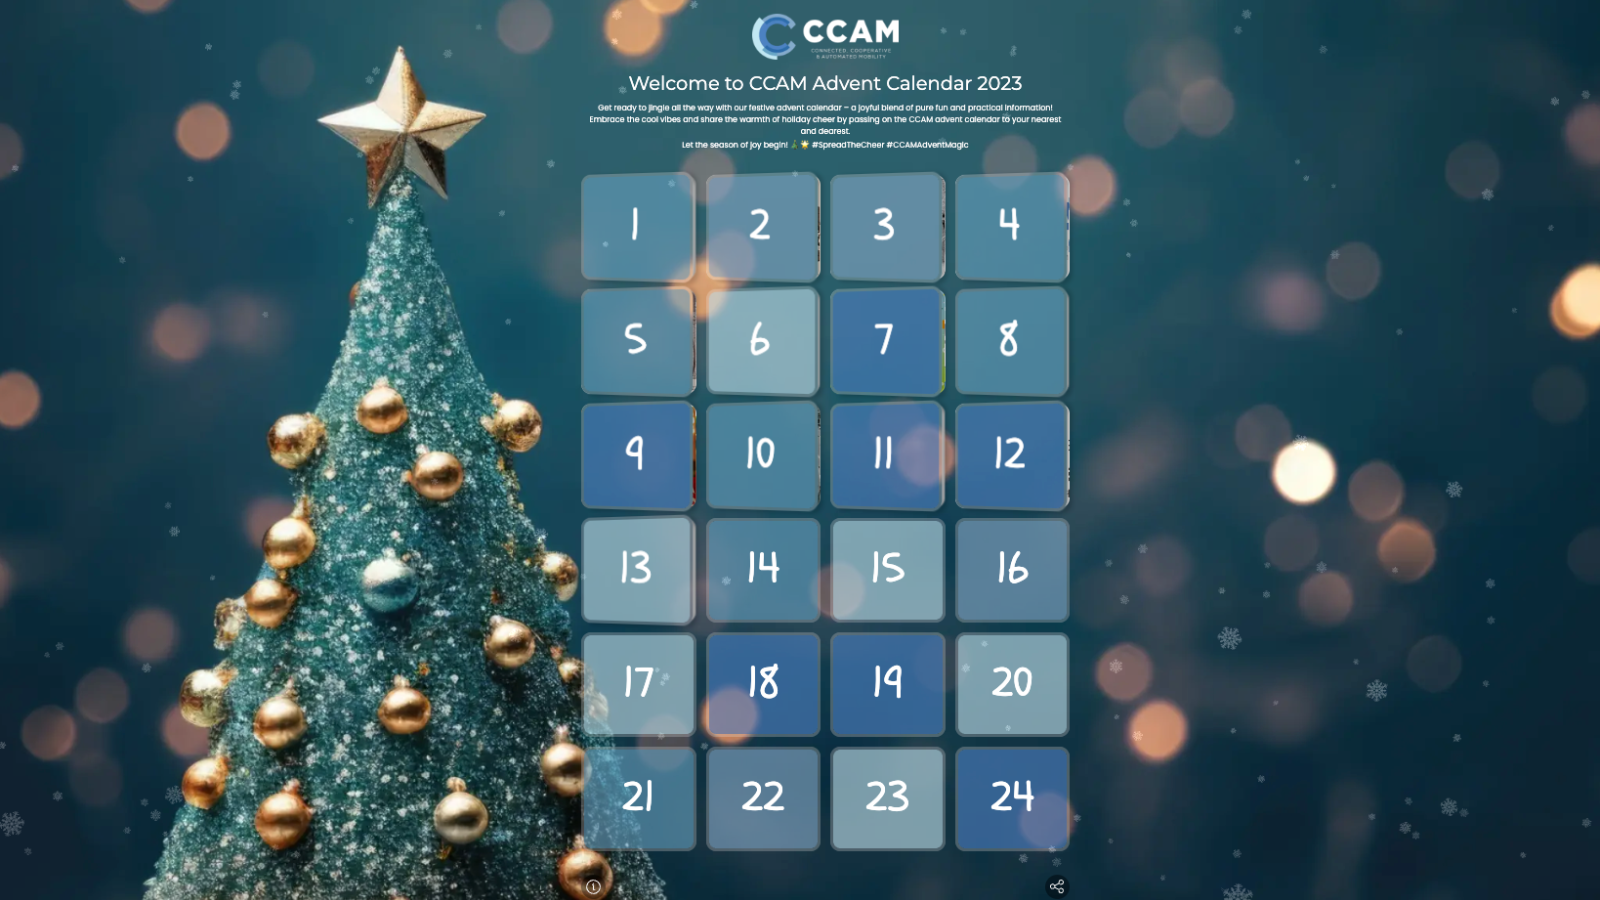 Get ready to unwrap the magic of the season with the CCAM Advent Calendar!